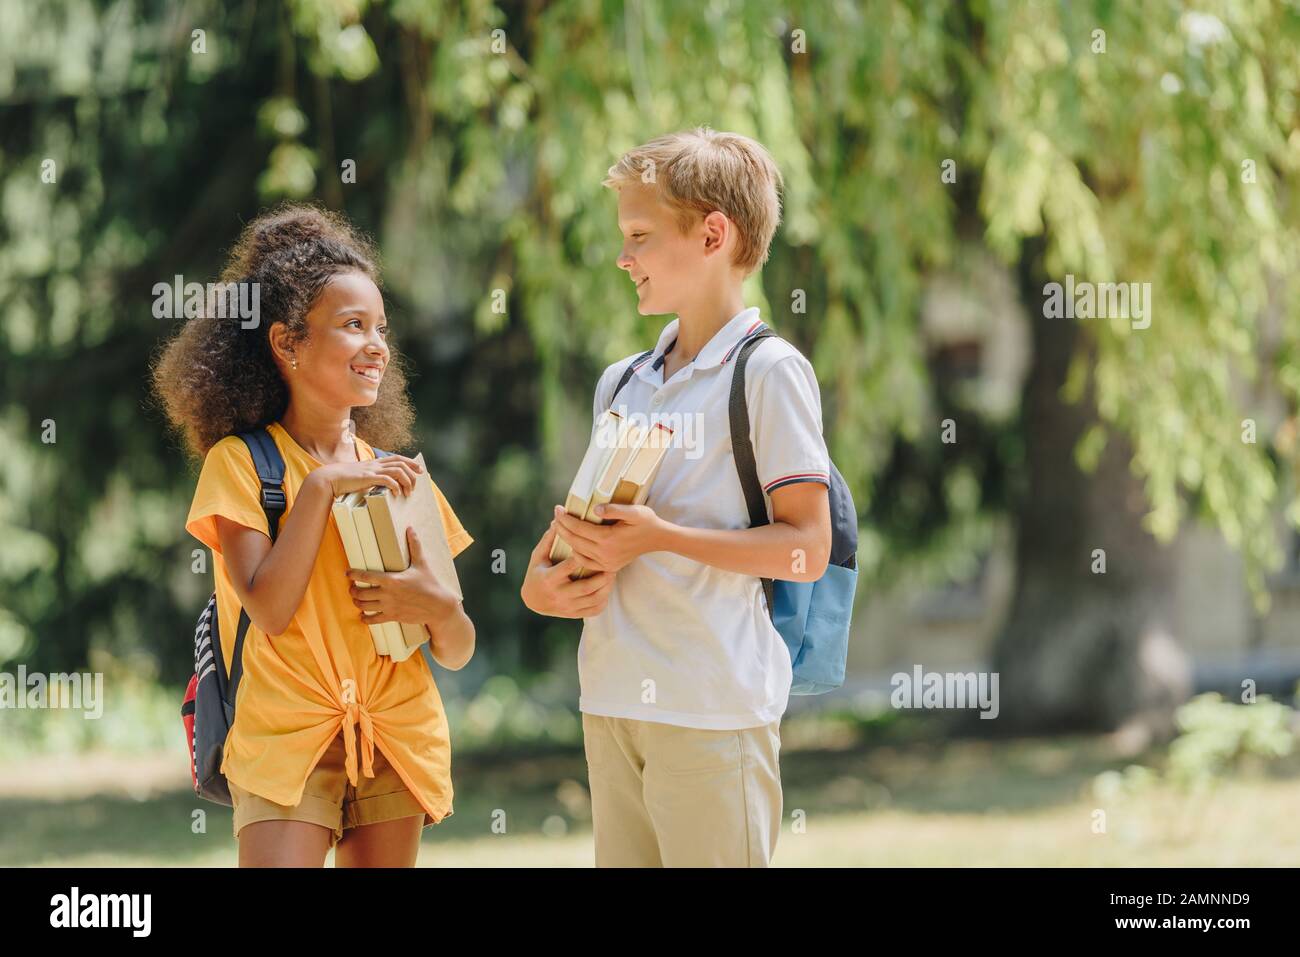 two cheerful multicultural schoolkids smiling and speaking while holding books Stock Photo